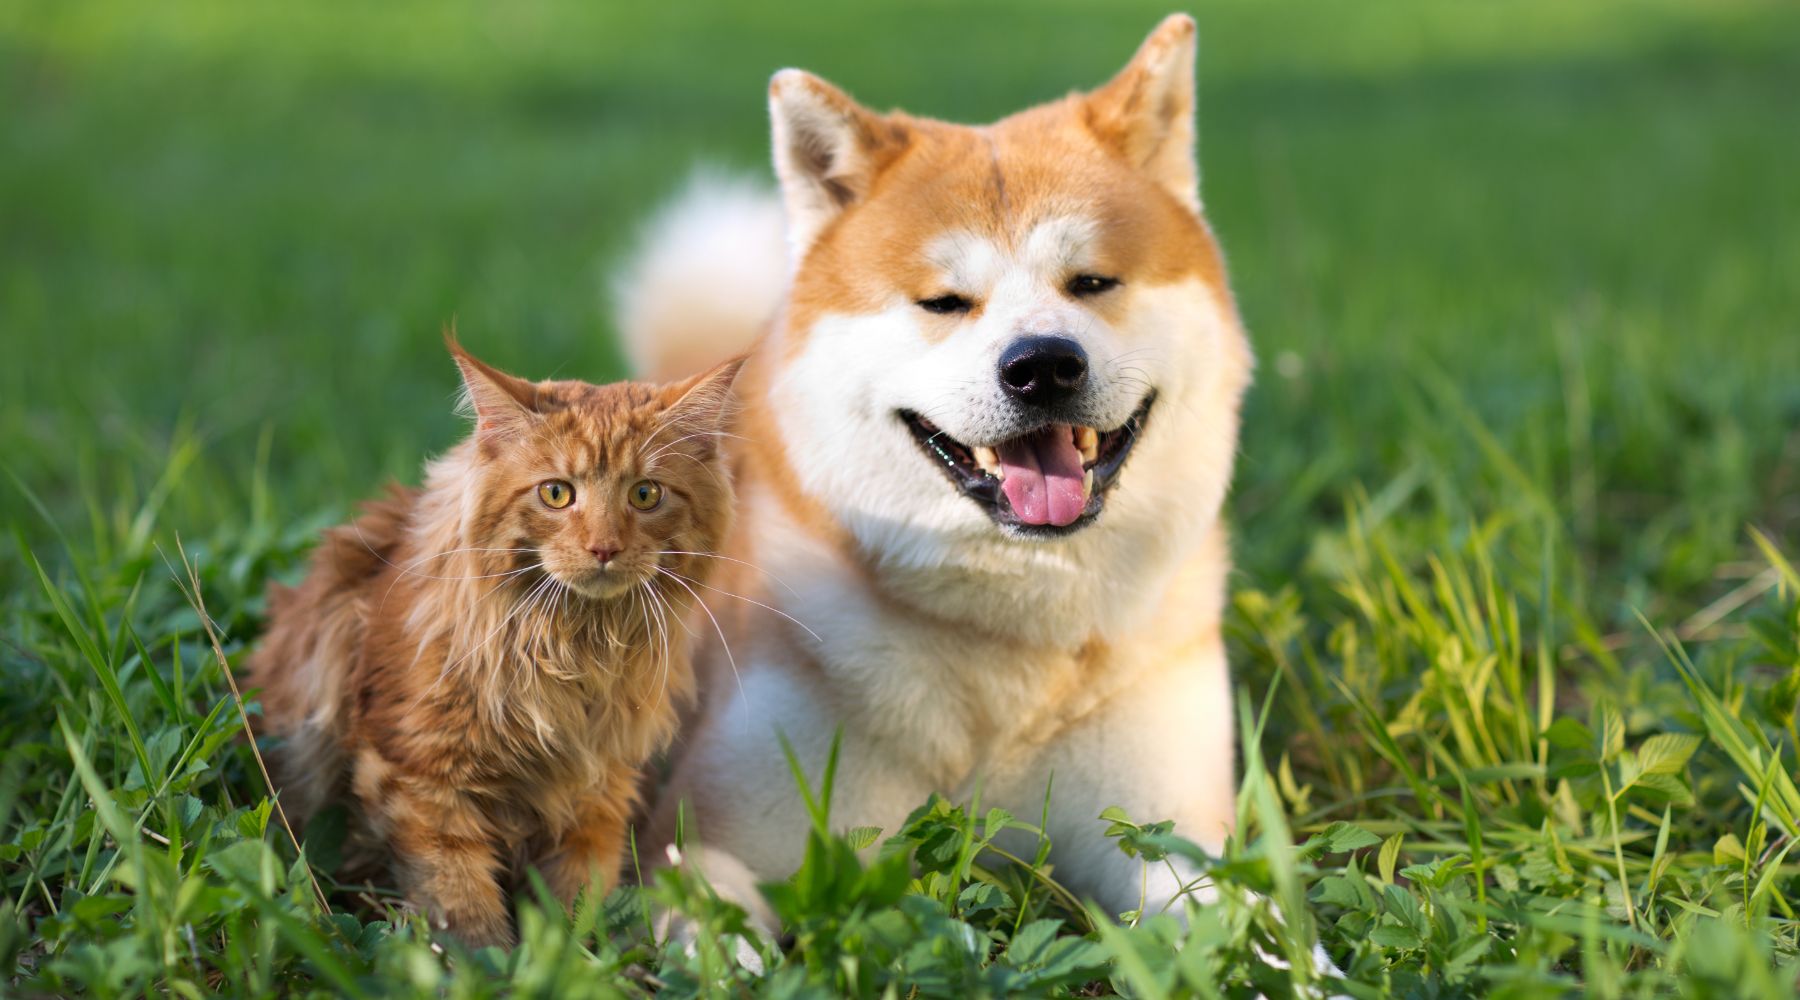 Natural ways to keep cats and dogs flea & tick free including using BioPet Fleas & Ticks - a natural, chemical free and affordable flea and tick repellent for cats and dogs.